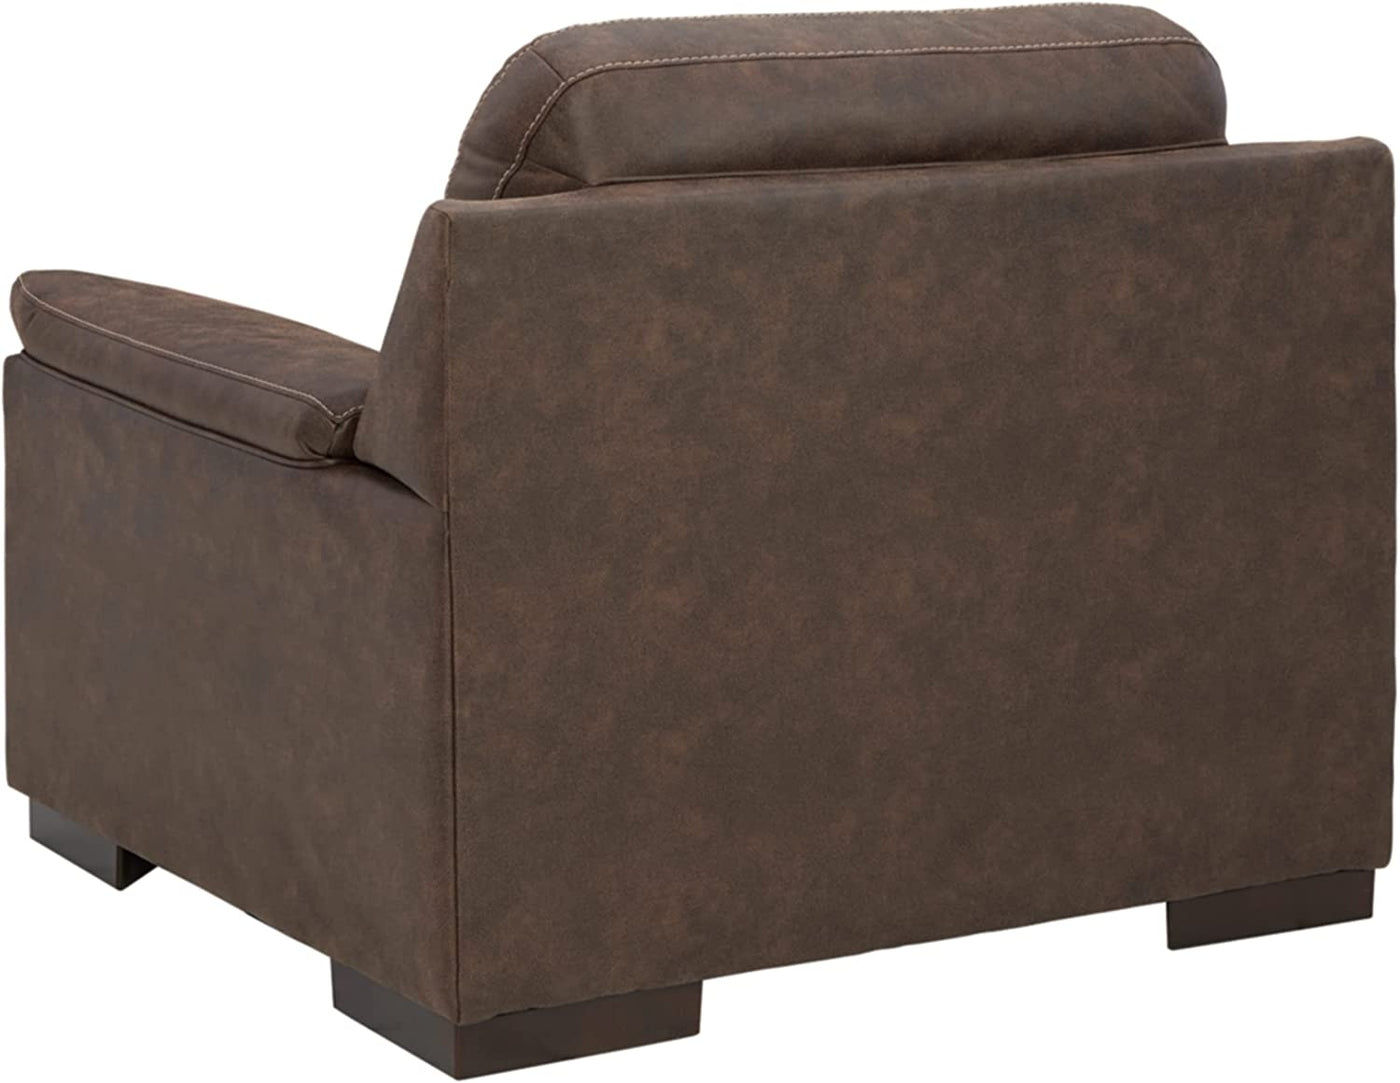 Ashley Maderla Modern Faux Leather Oversized Accent Chair, Walnut Brown-$270